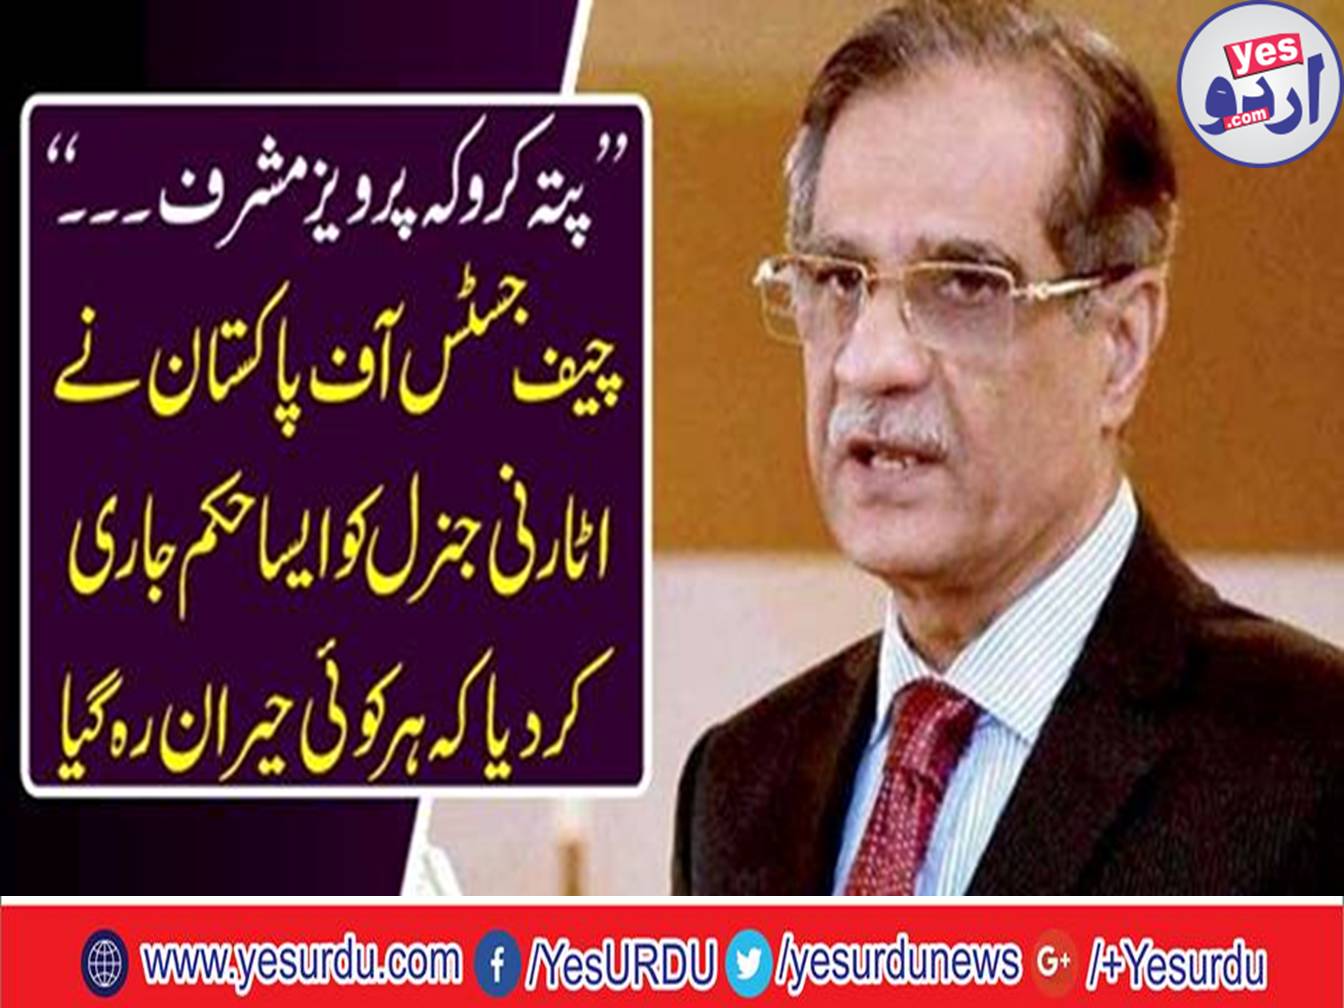 Whether Musharraf is coming or not, Chief Justice Saqib Nisar